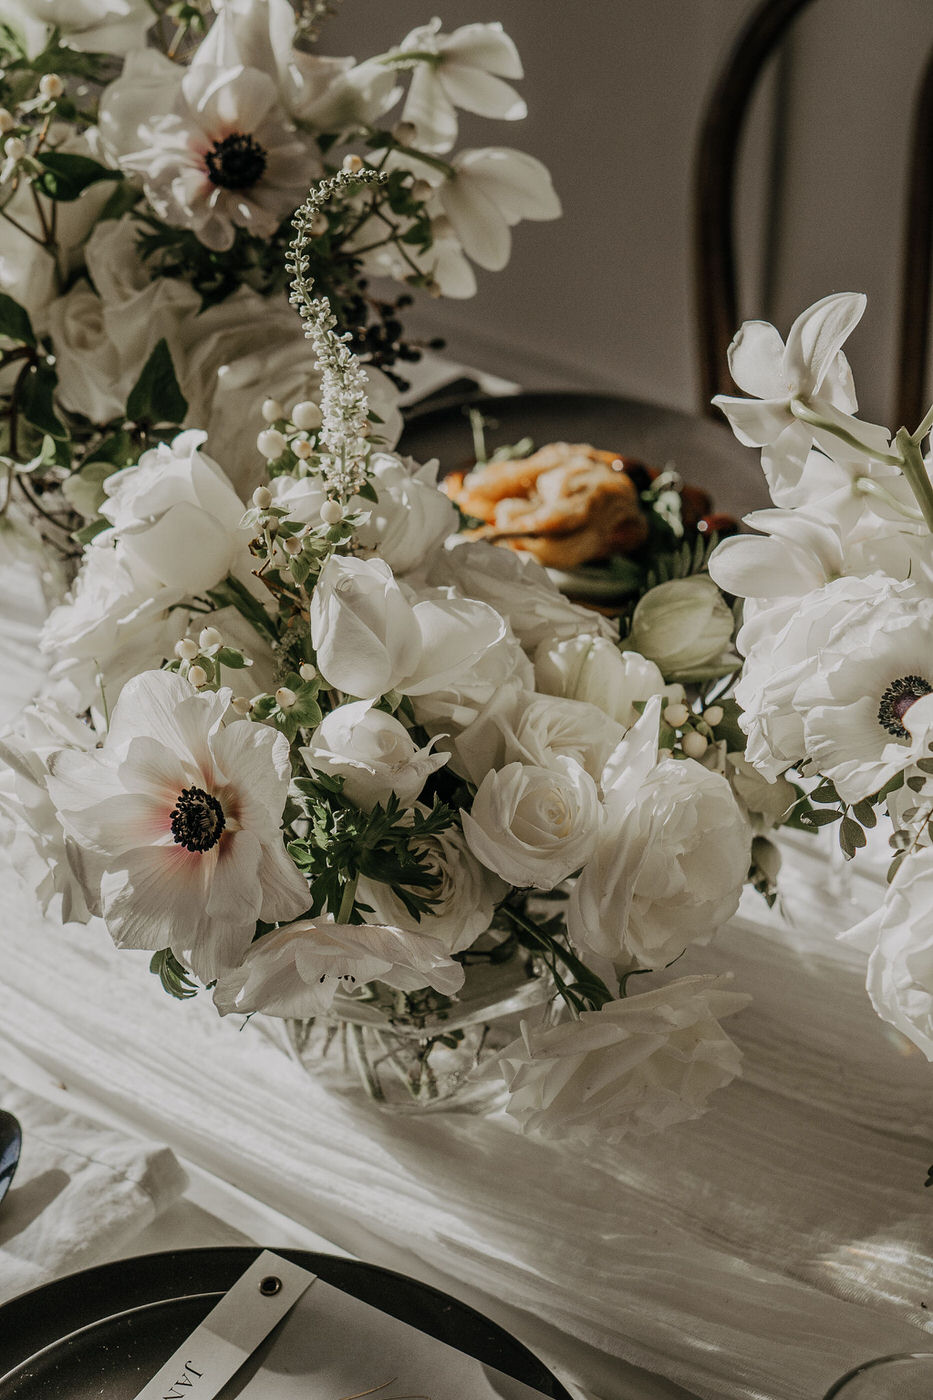 LUXURIOUS LIGHT \ Styled Shoot captured by The Wolfpack | Styled Shoot ...